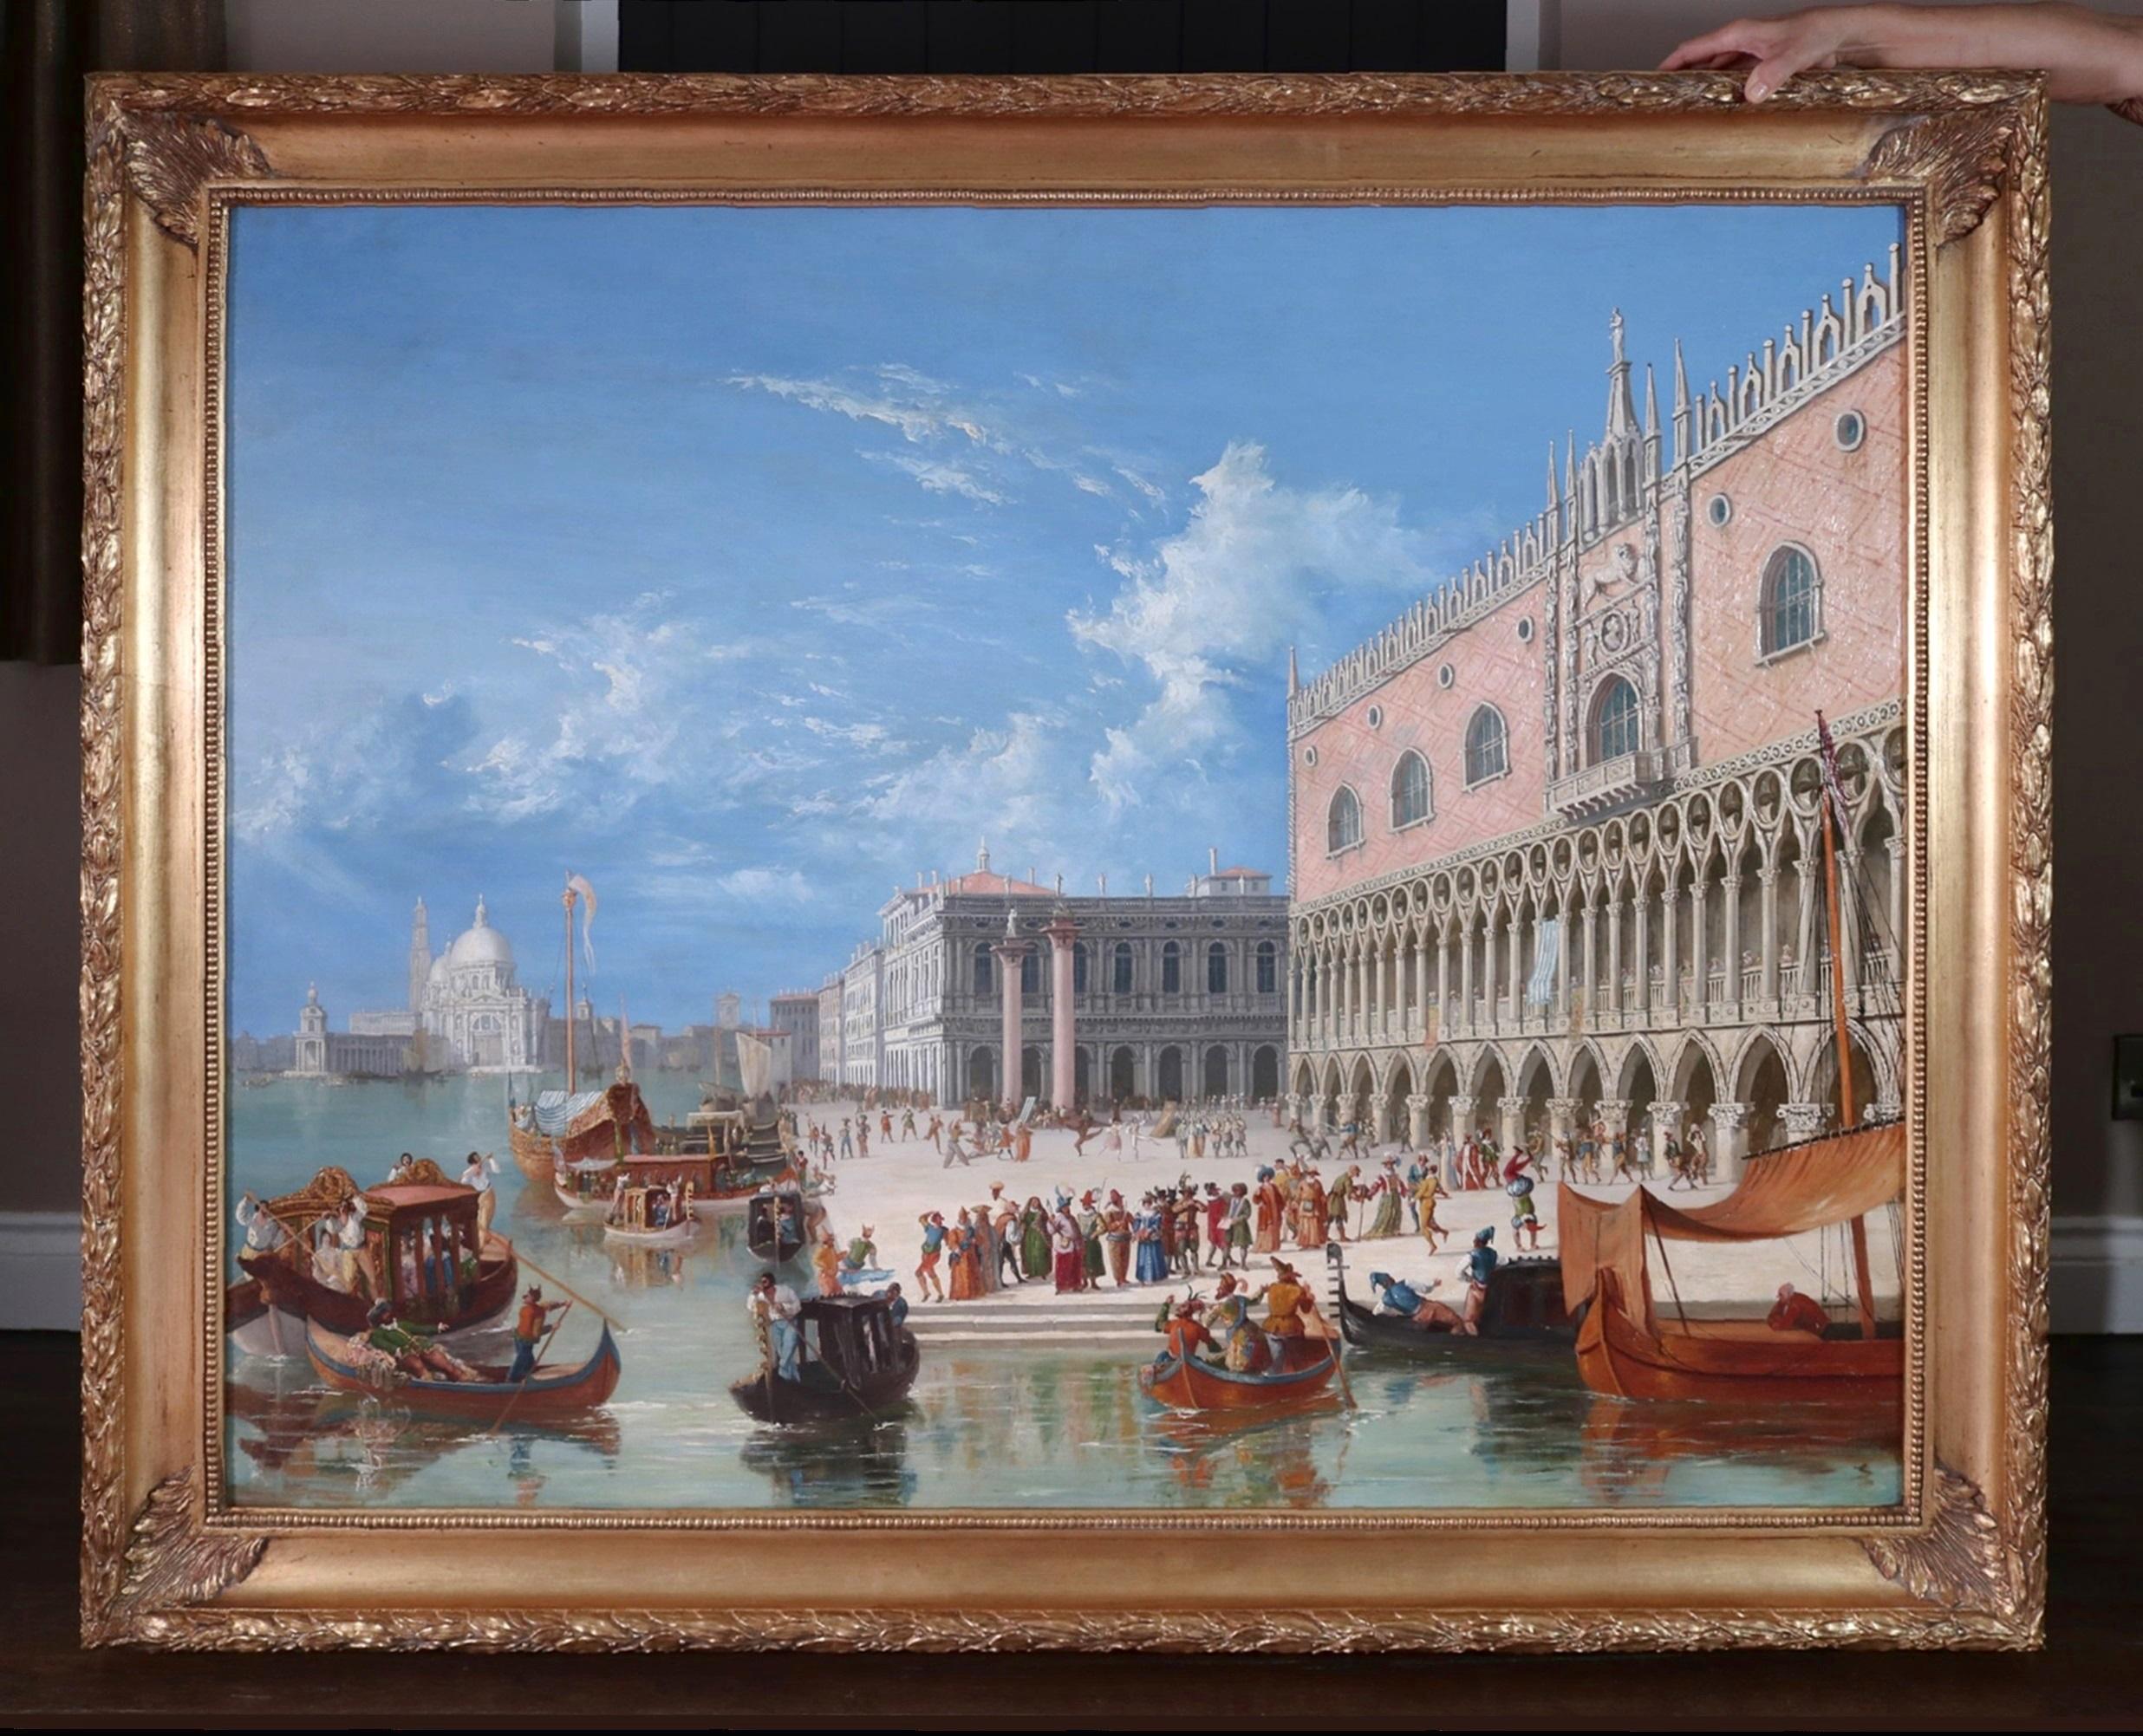 James Holland Figurative Painting - Carnevale di Venezia - Large 19th Century Oil Painting Venice Italy Canaletto